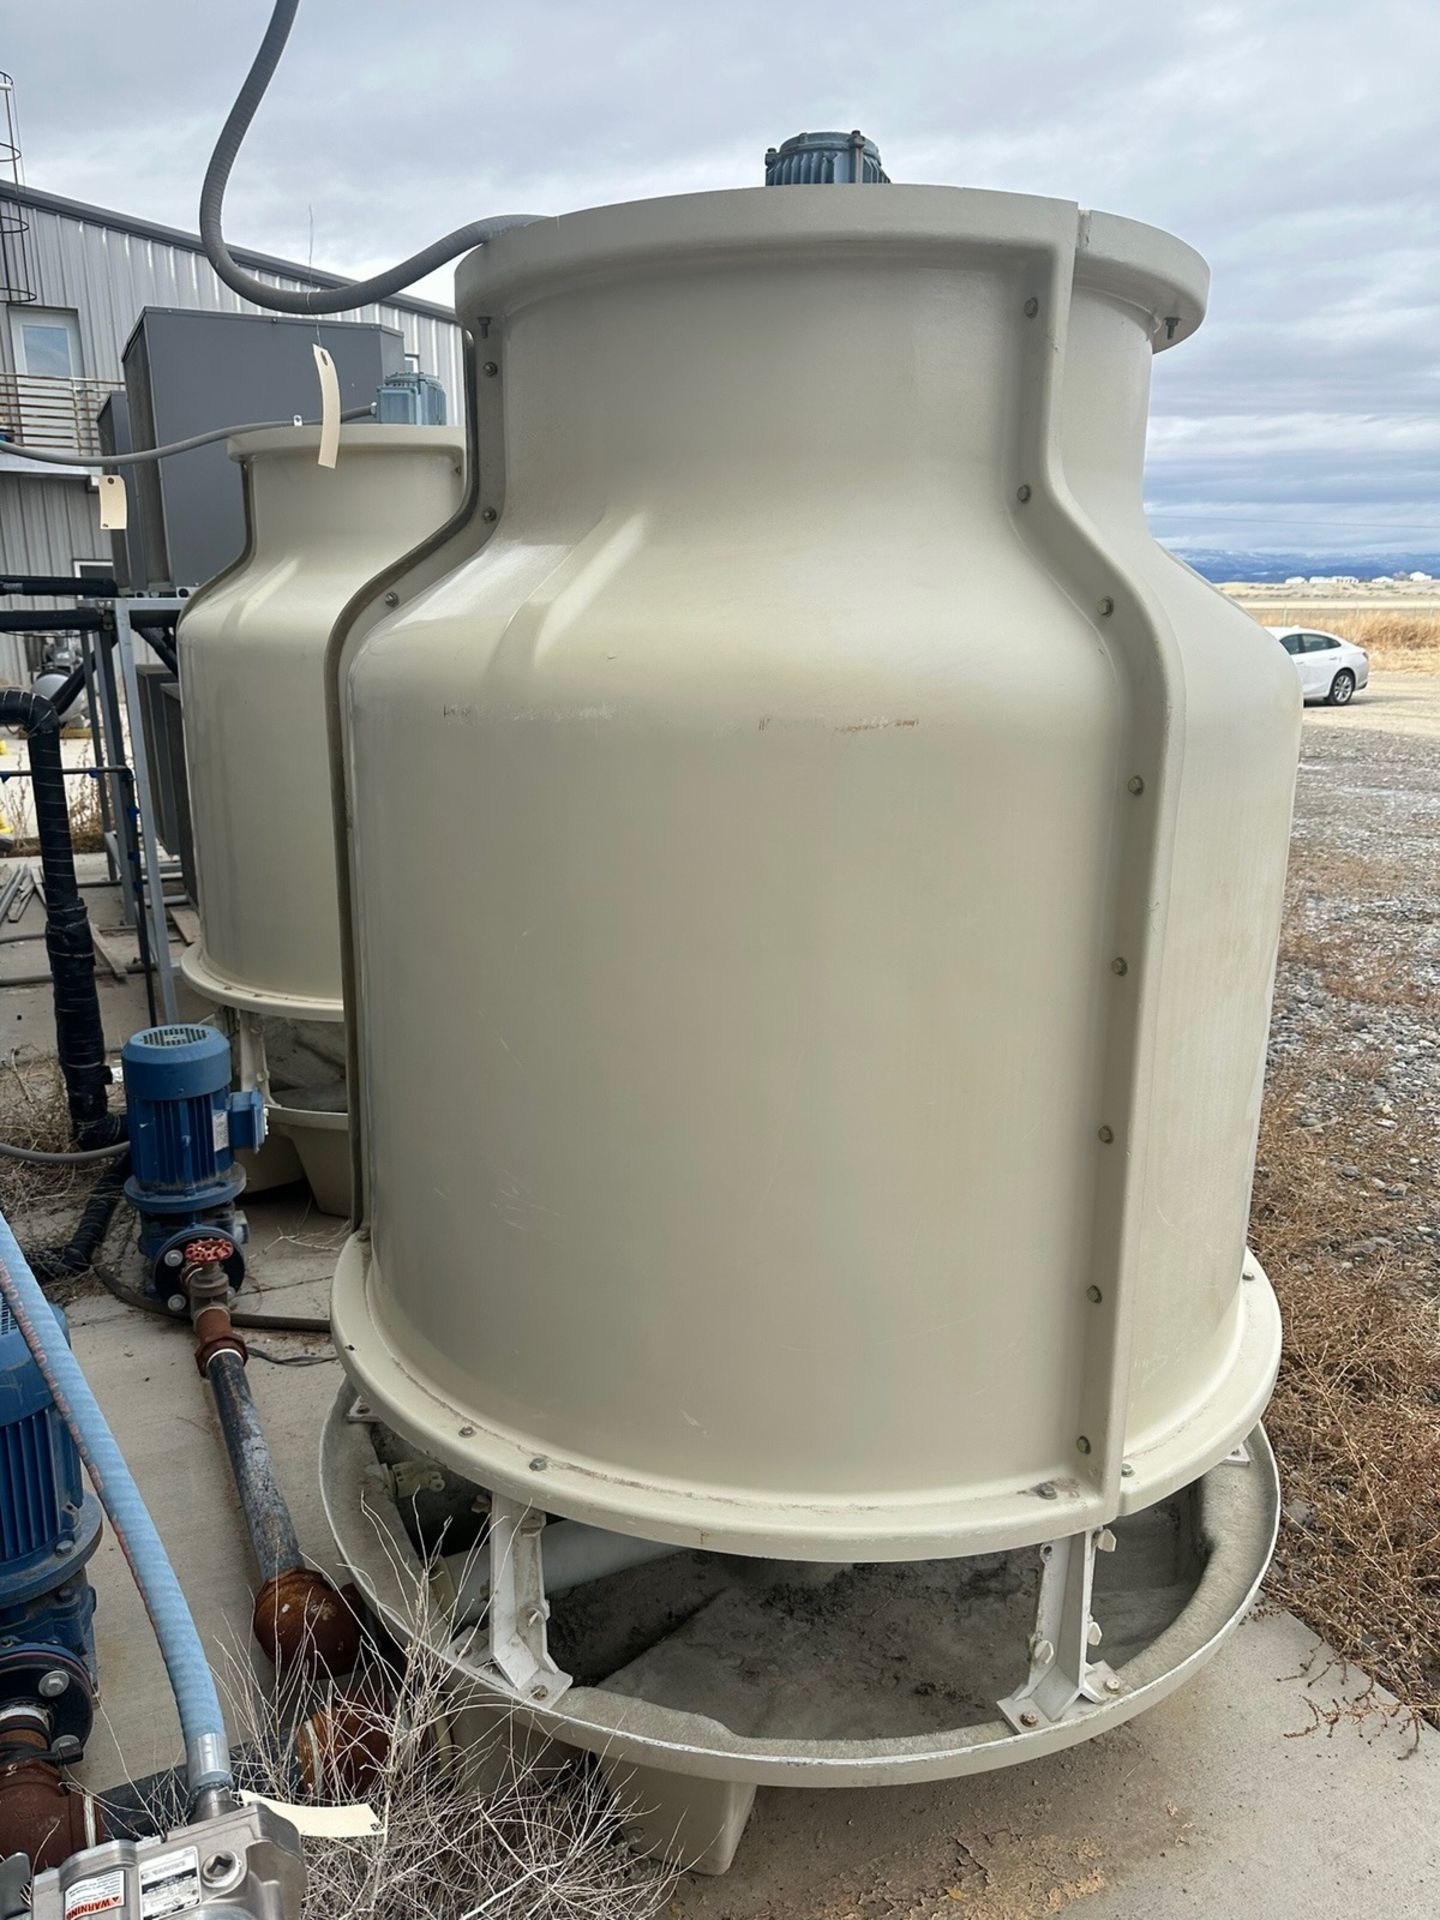 Mini Cooling Tower for Fluid Circulating Water System | Rig Fee $175 - Image 3 of 5